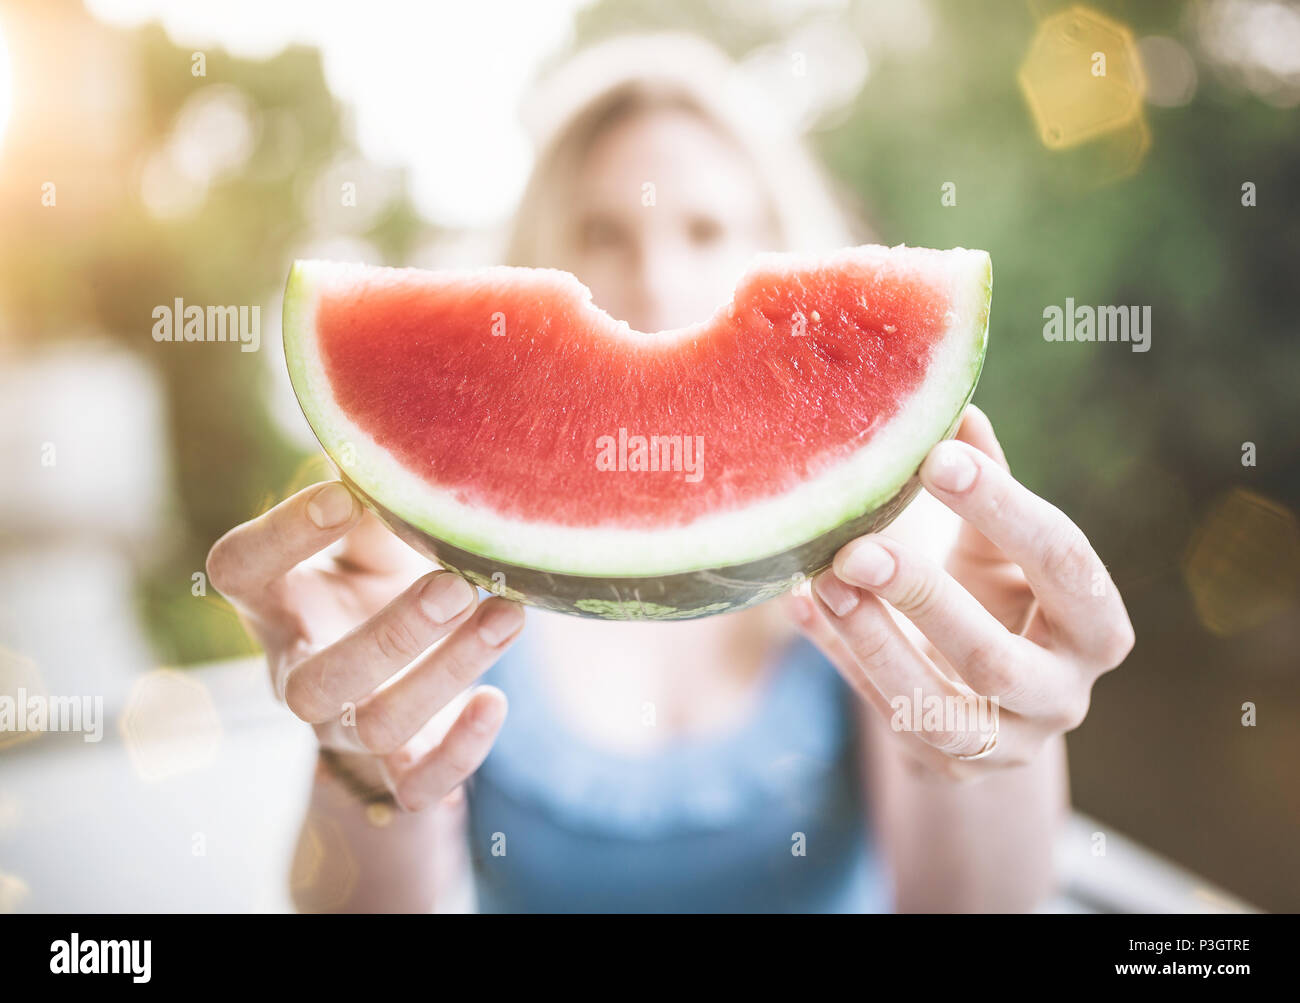 blond woman holding a slice of juicy fresh watermelon Stock Photo